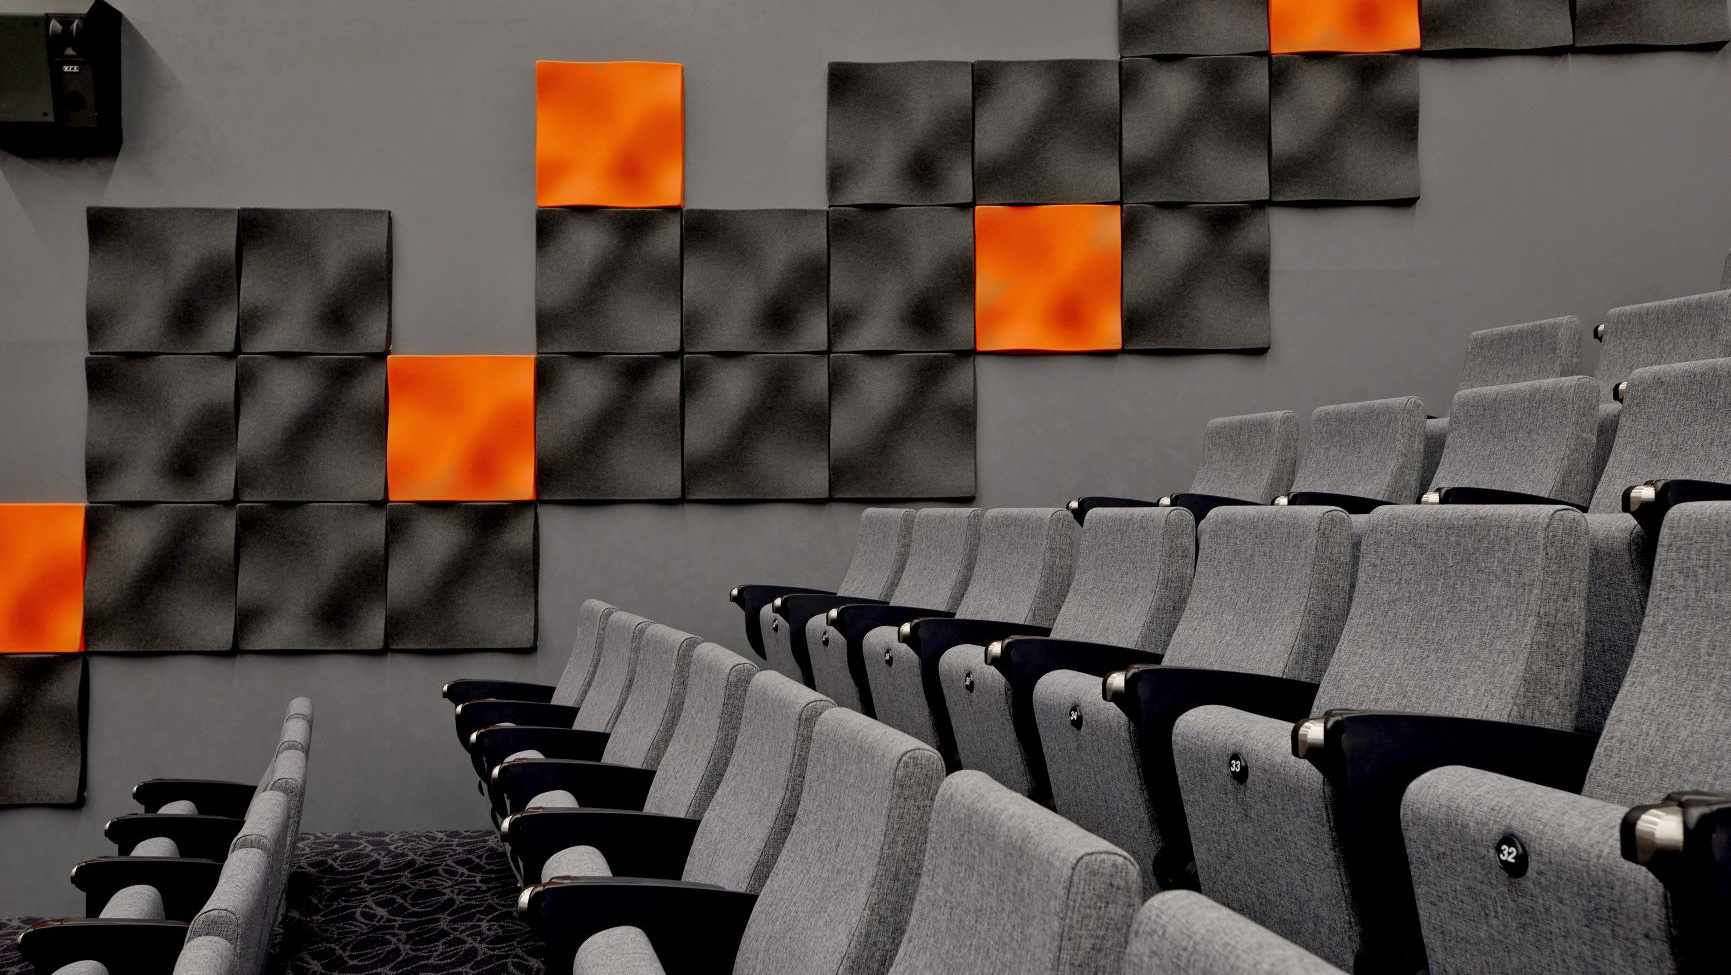 Acoustic treatment completed by Miller Creative thumbnail